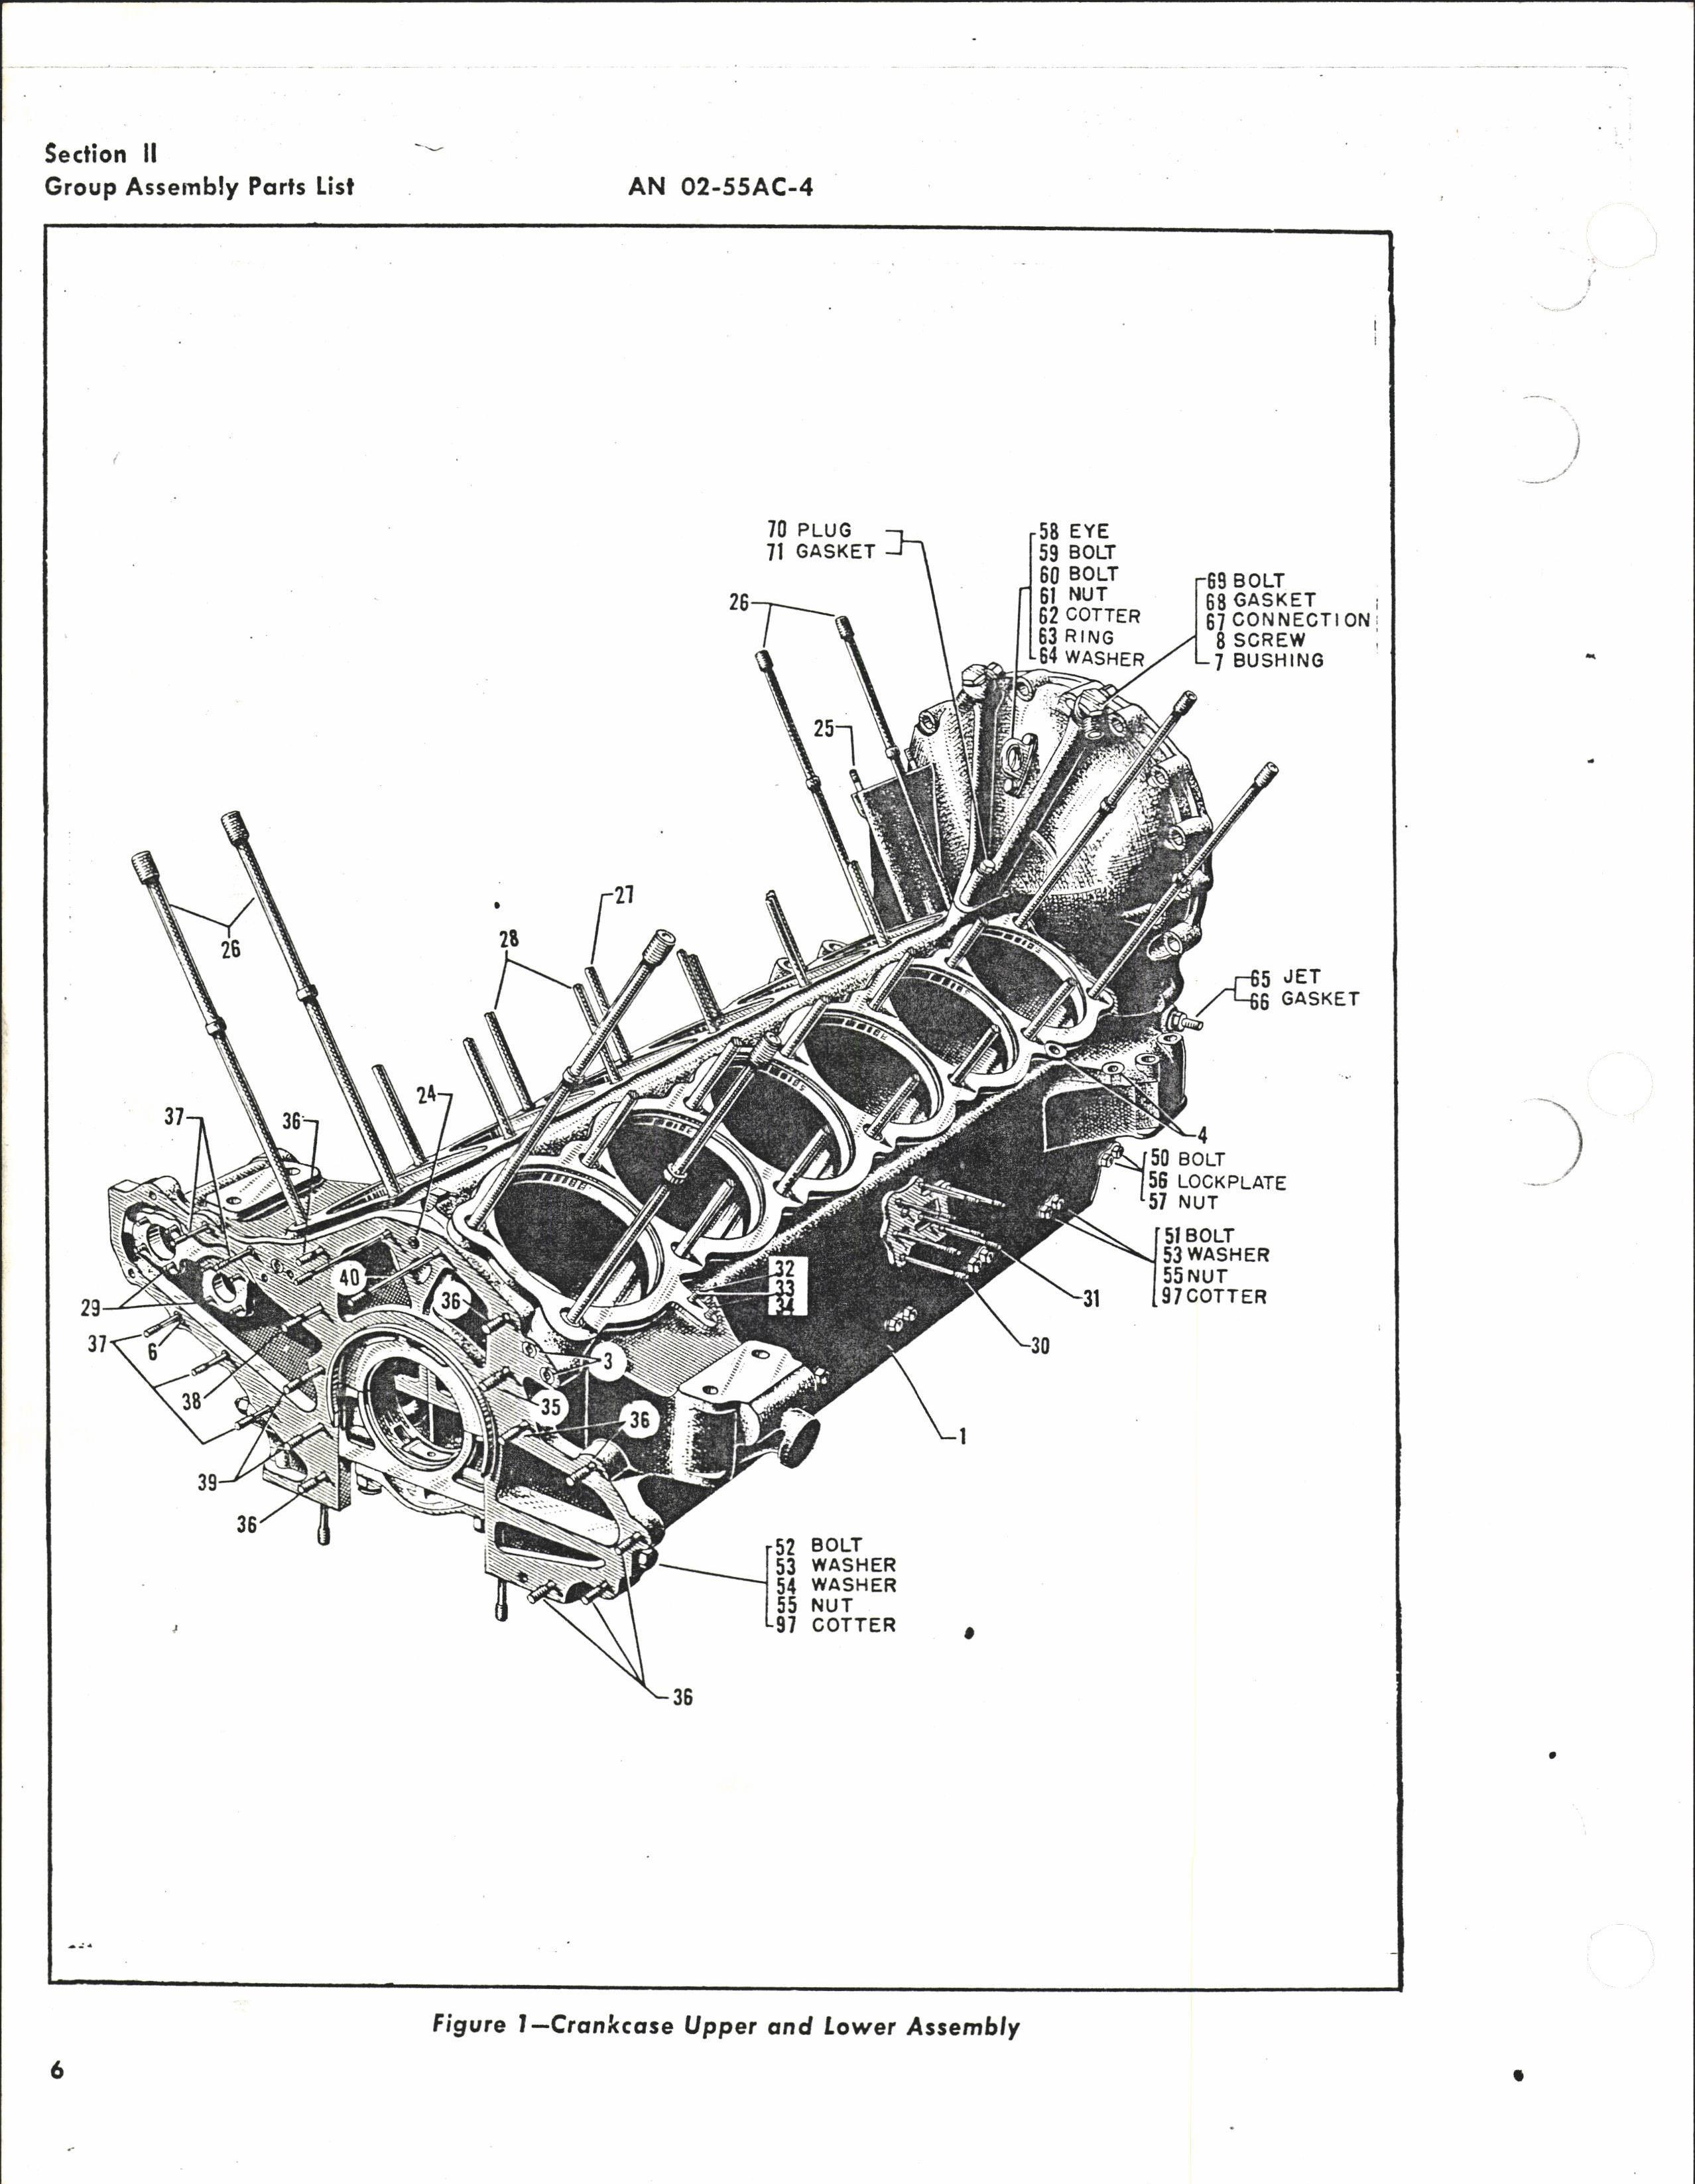 Sample page 8 from AirCorps Library document: Parts Catalog for V-1650-3, -7, -13, and Merlin 68 and 69 Aircraft Engines